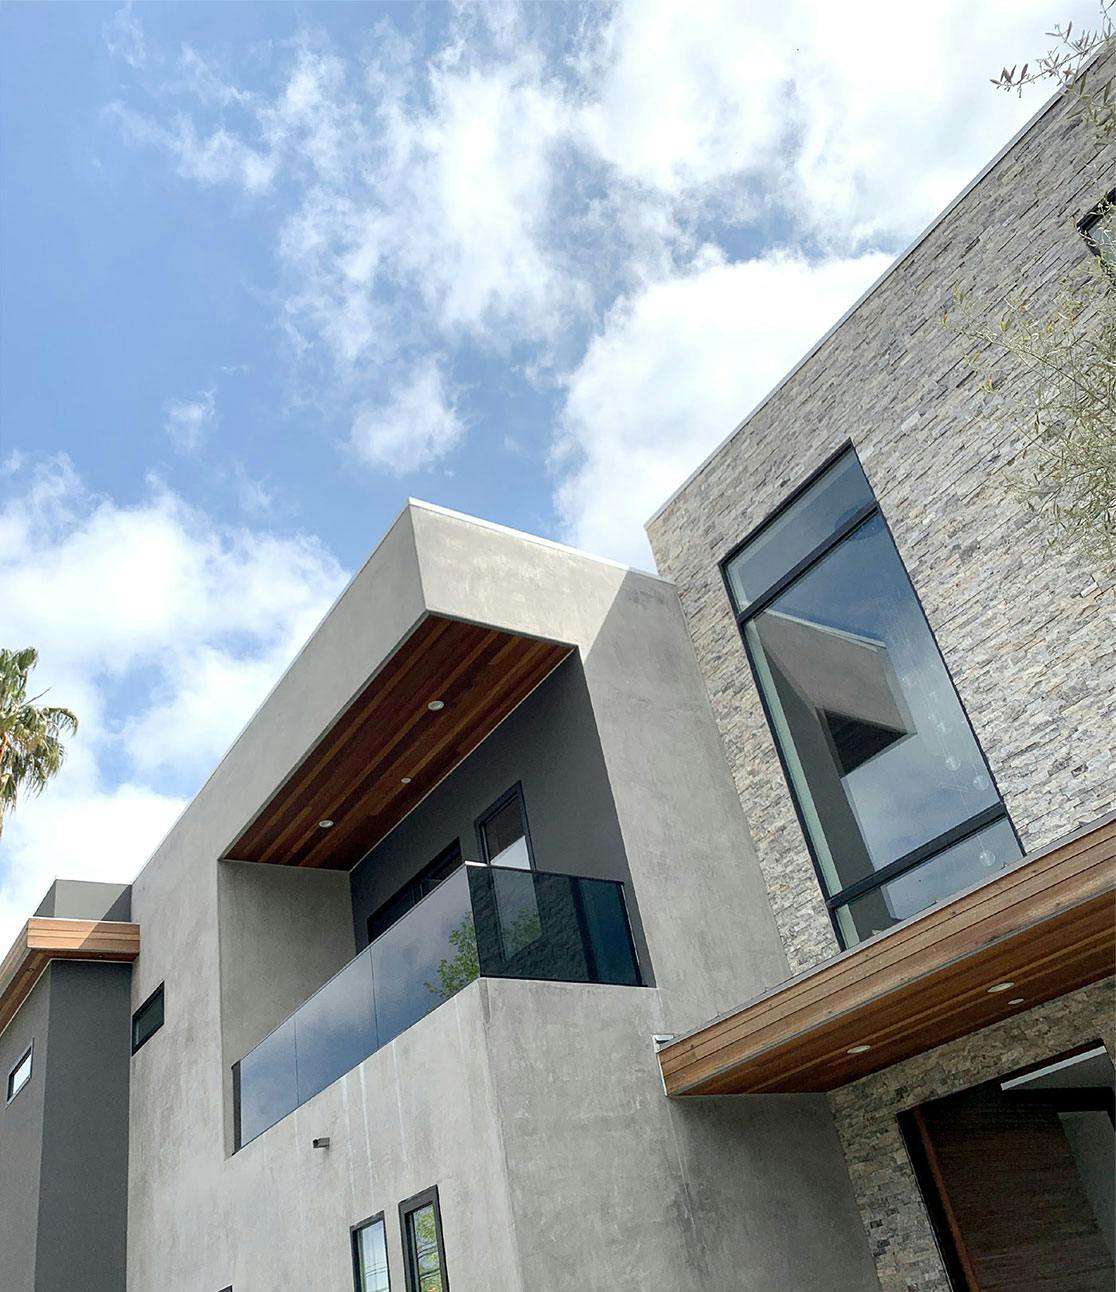 A photograph of the exterior facade of the home chosen for the event venue. On one side the facade is cement and has a balcony. The other side is a stacked slate. Both facades are square and have wooden and steel accents and large windows.